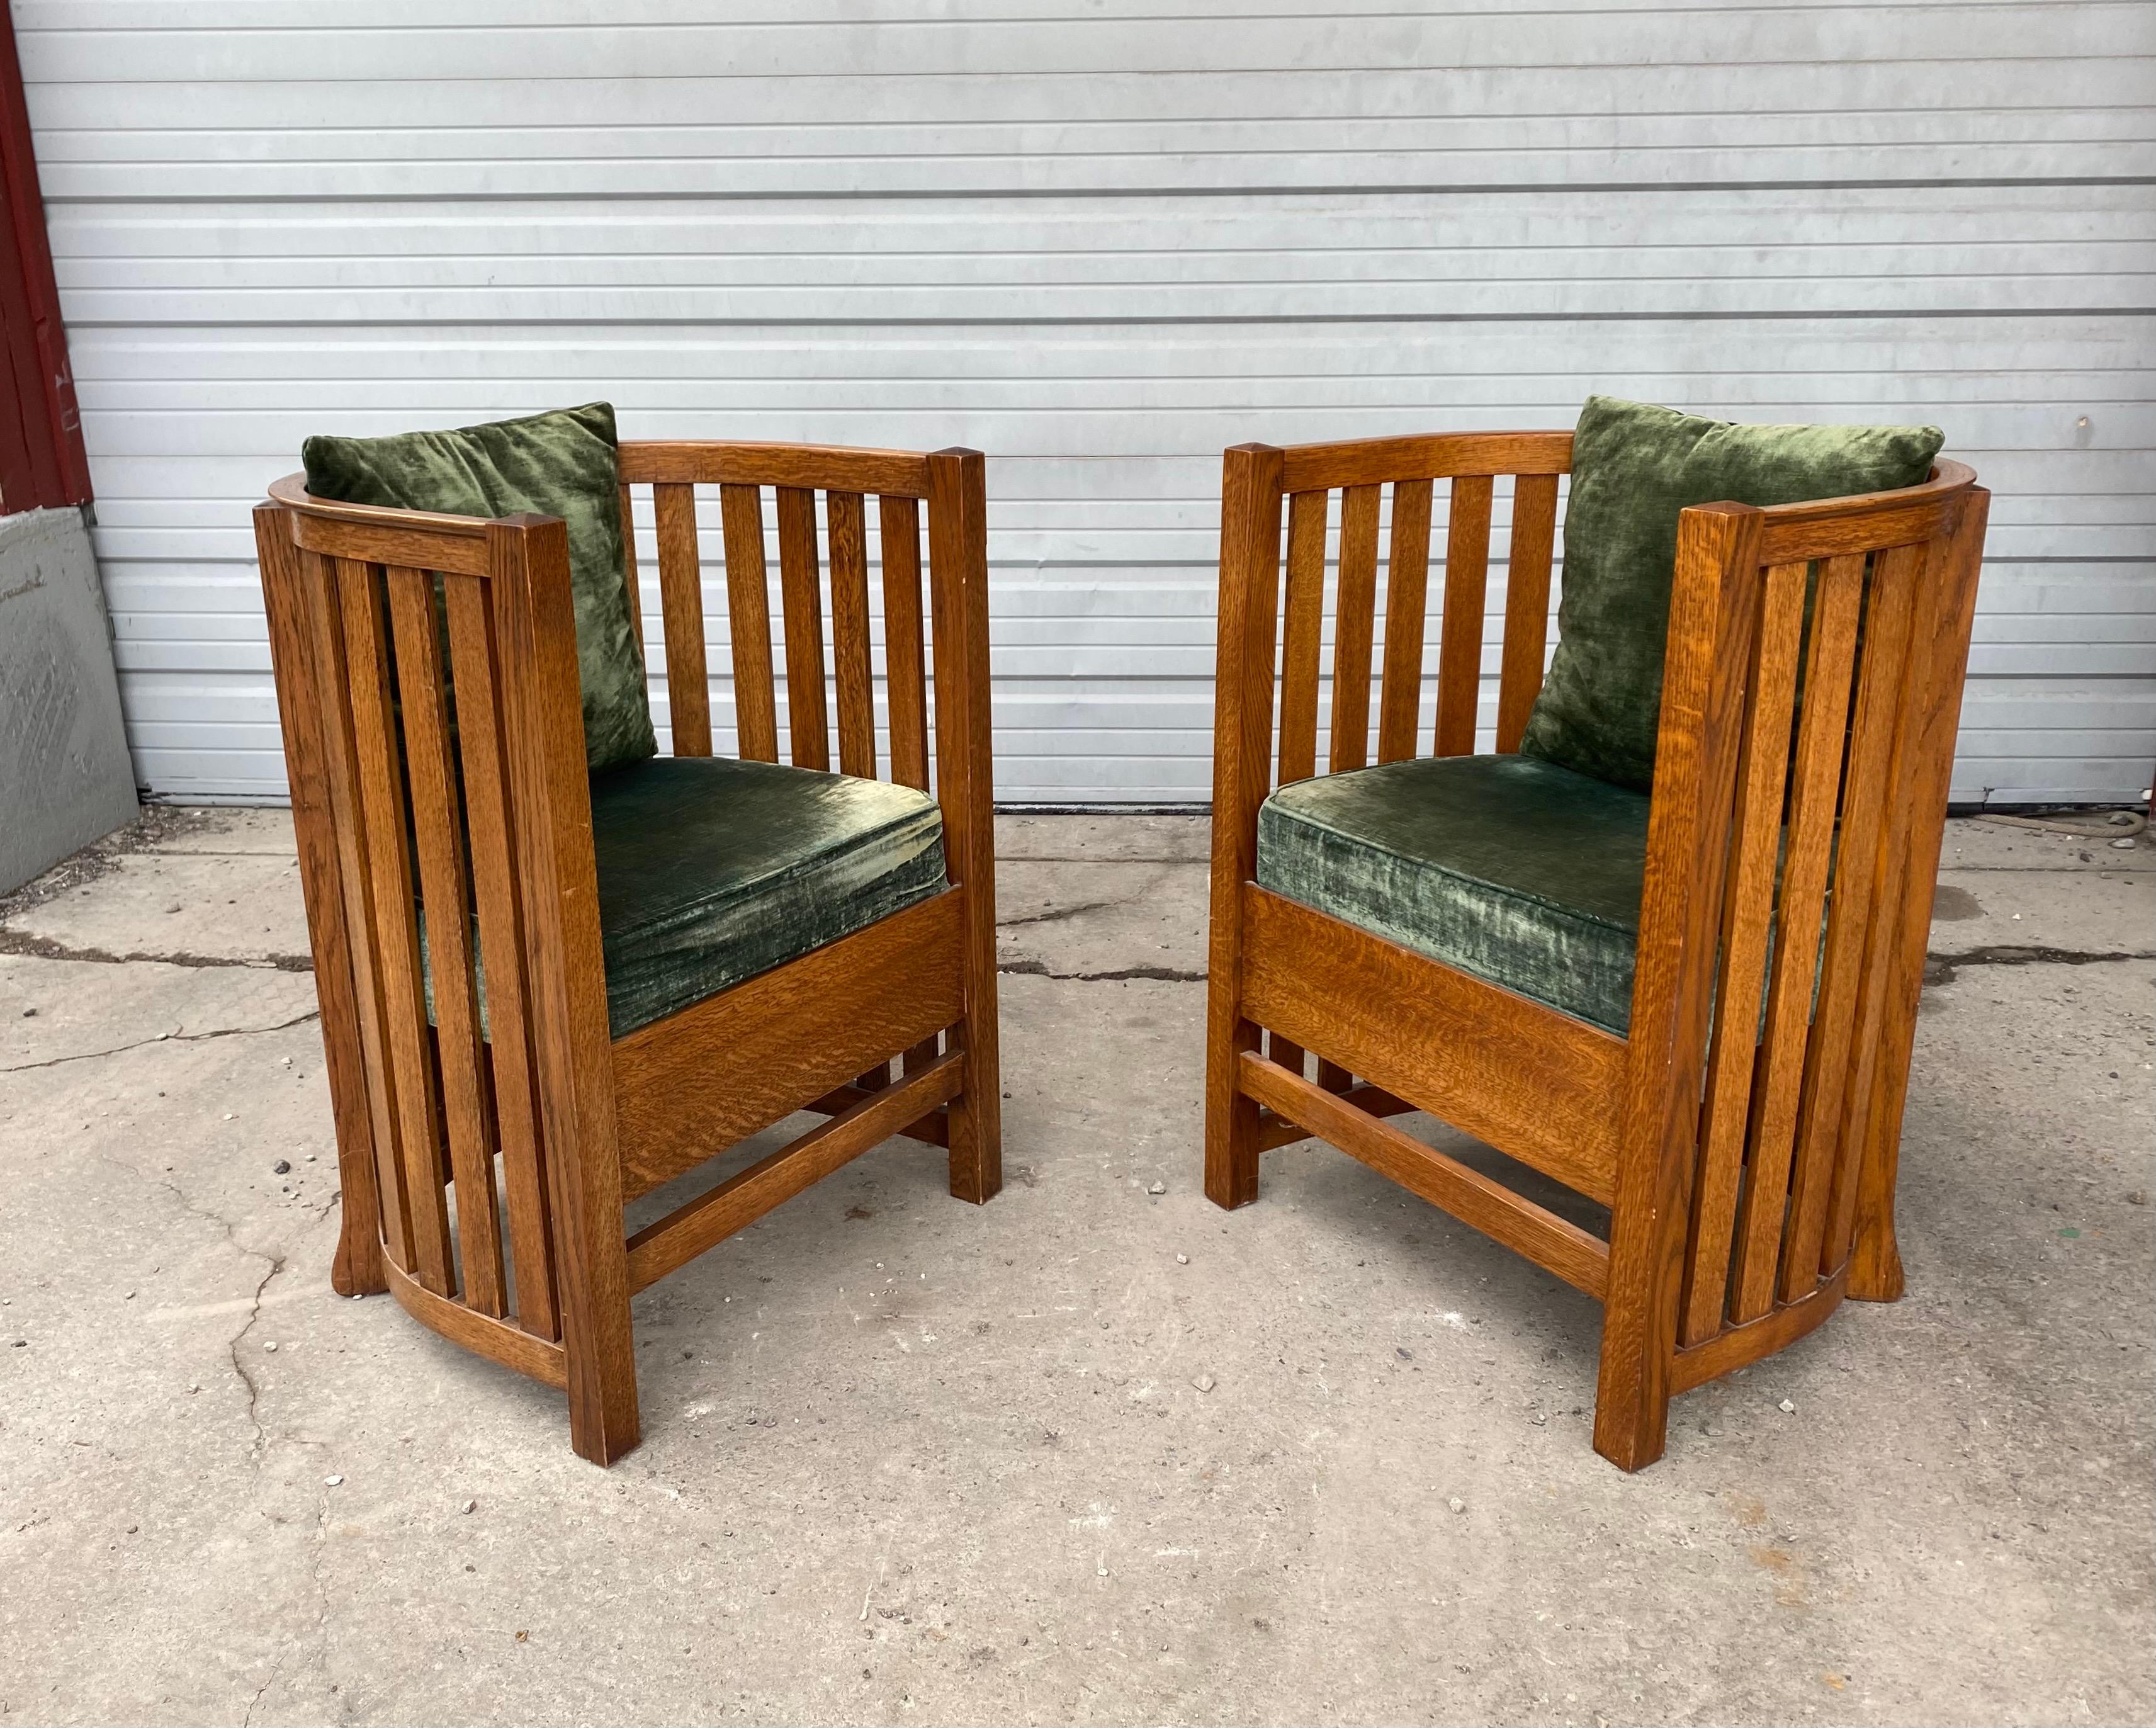 Mid-20th Century Classic Pair of Barrel Chairs, after Frank Lloyd Wright, attrib. Plail Brothers